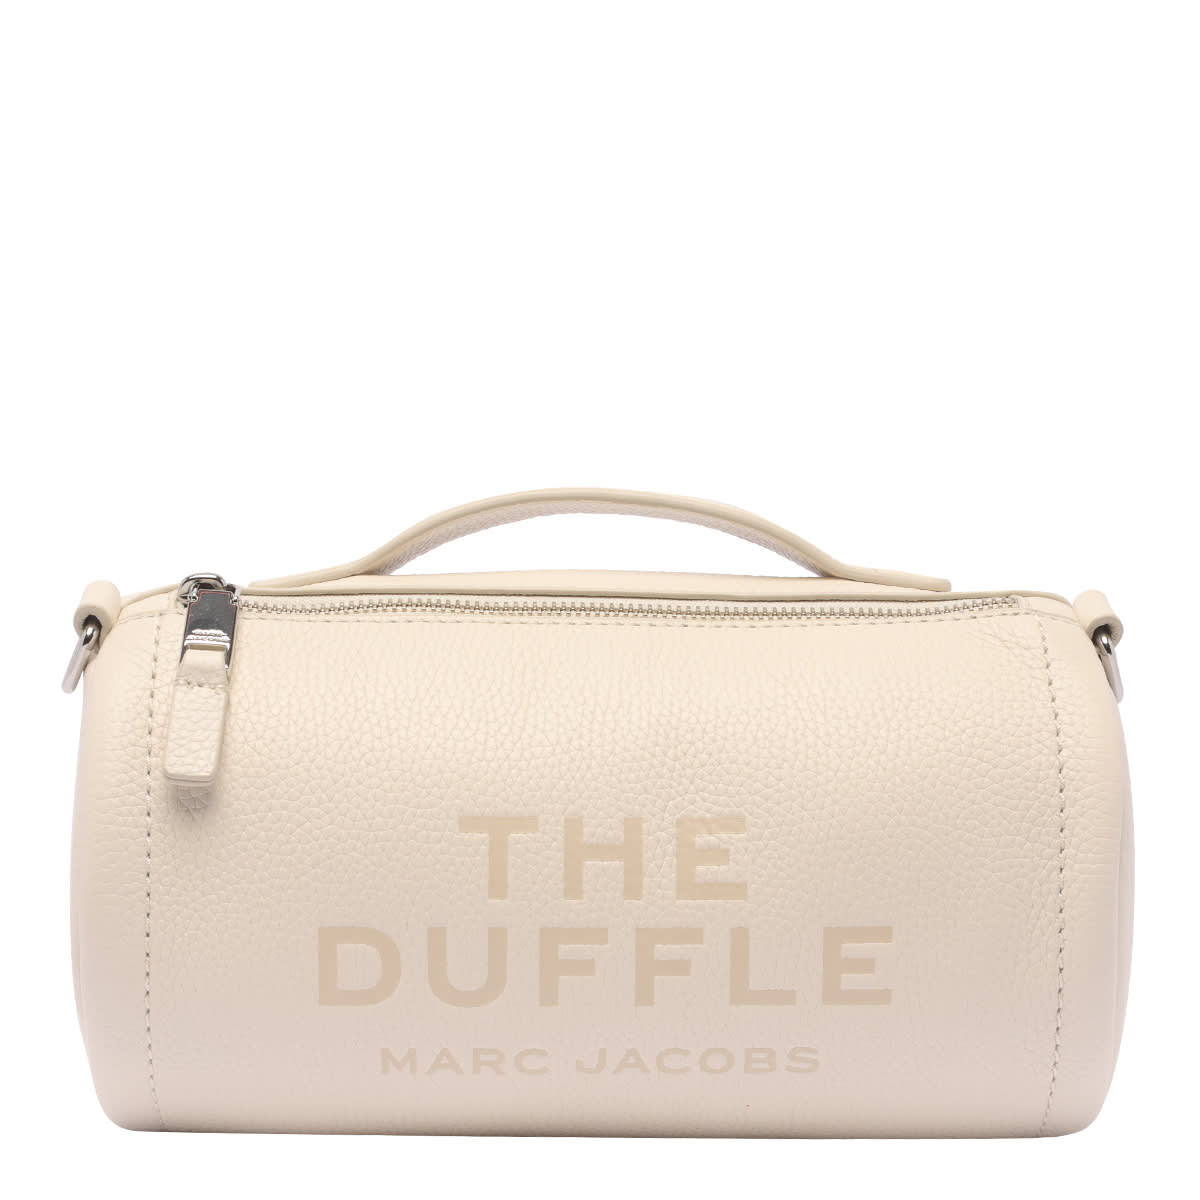 Marc Jacobs The Duffle Bag In White | ModeSens